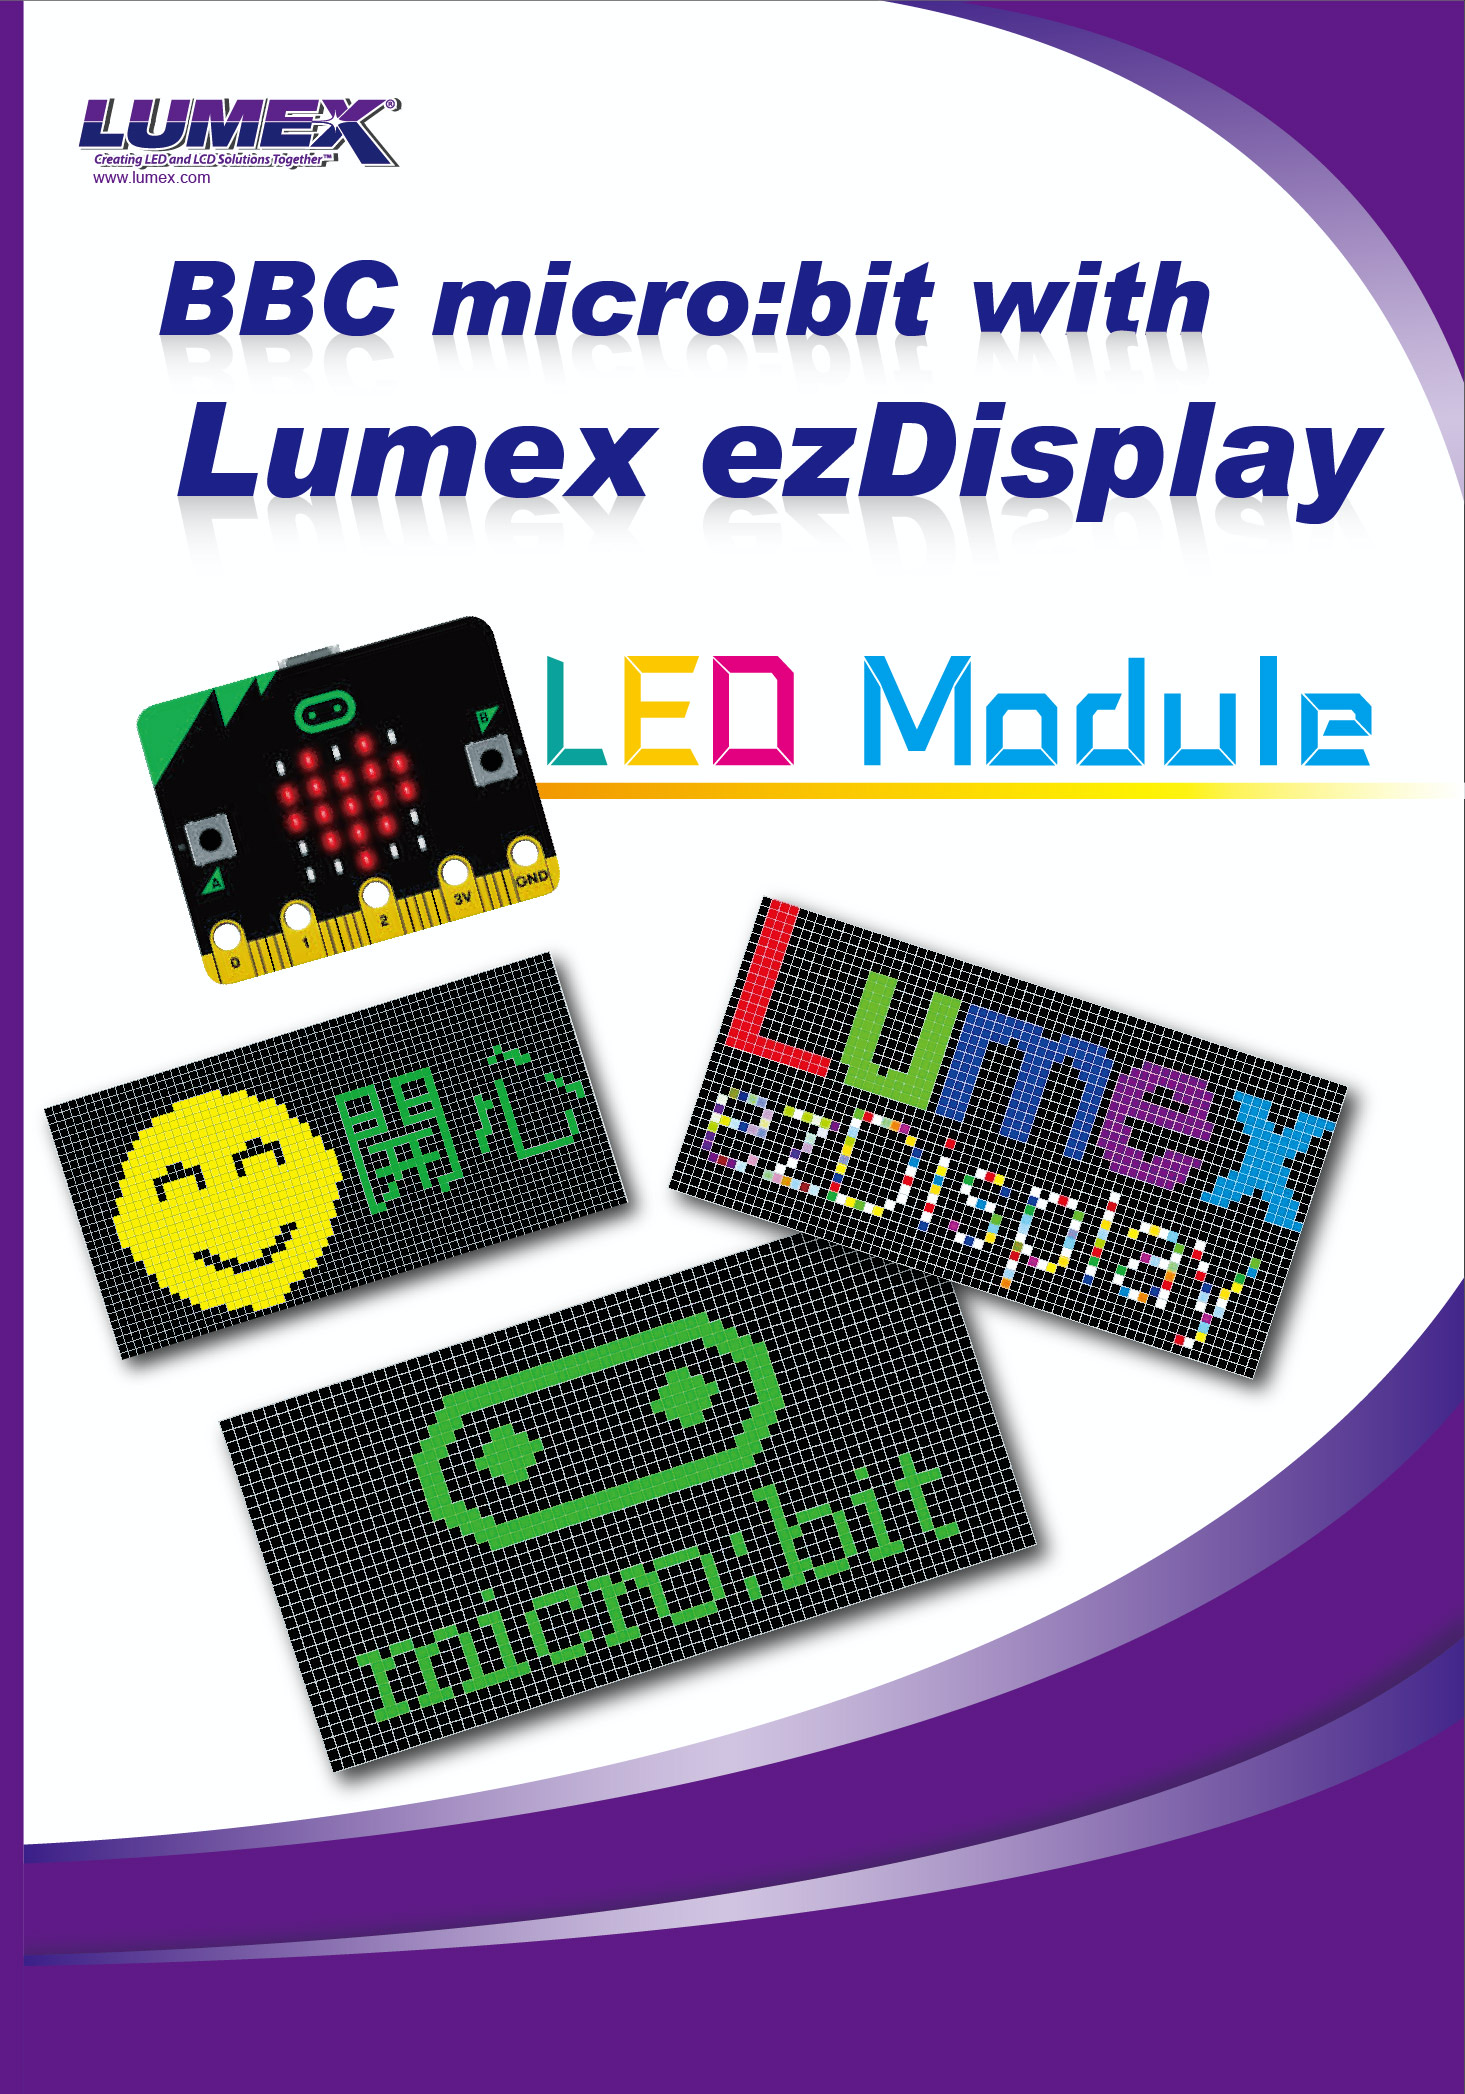 yawning Enlighten buffet ezDisplay LED Module with PC and BBC micro:bit